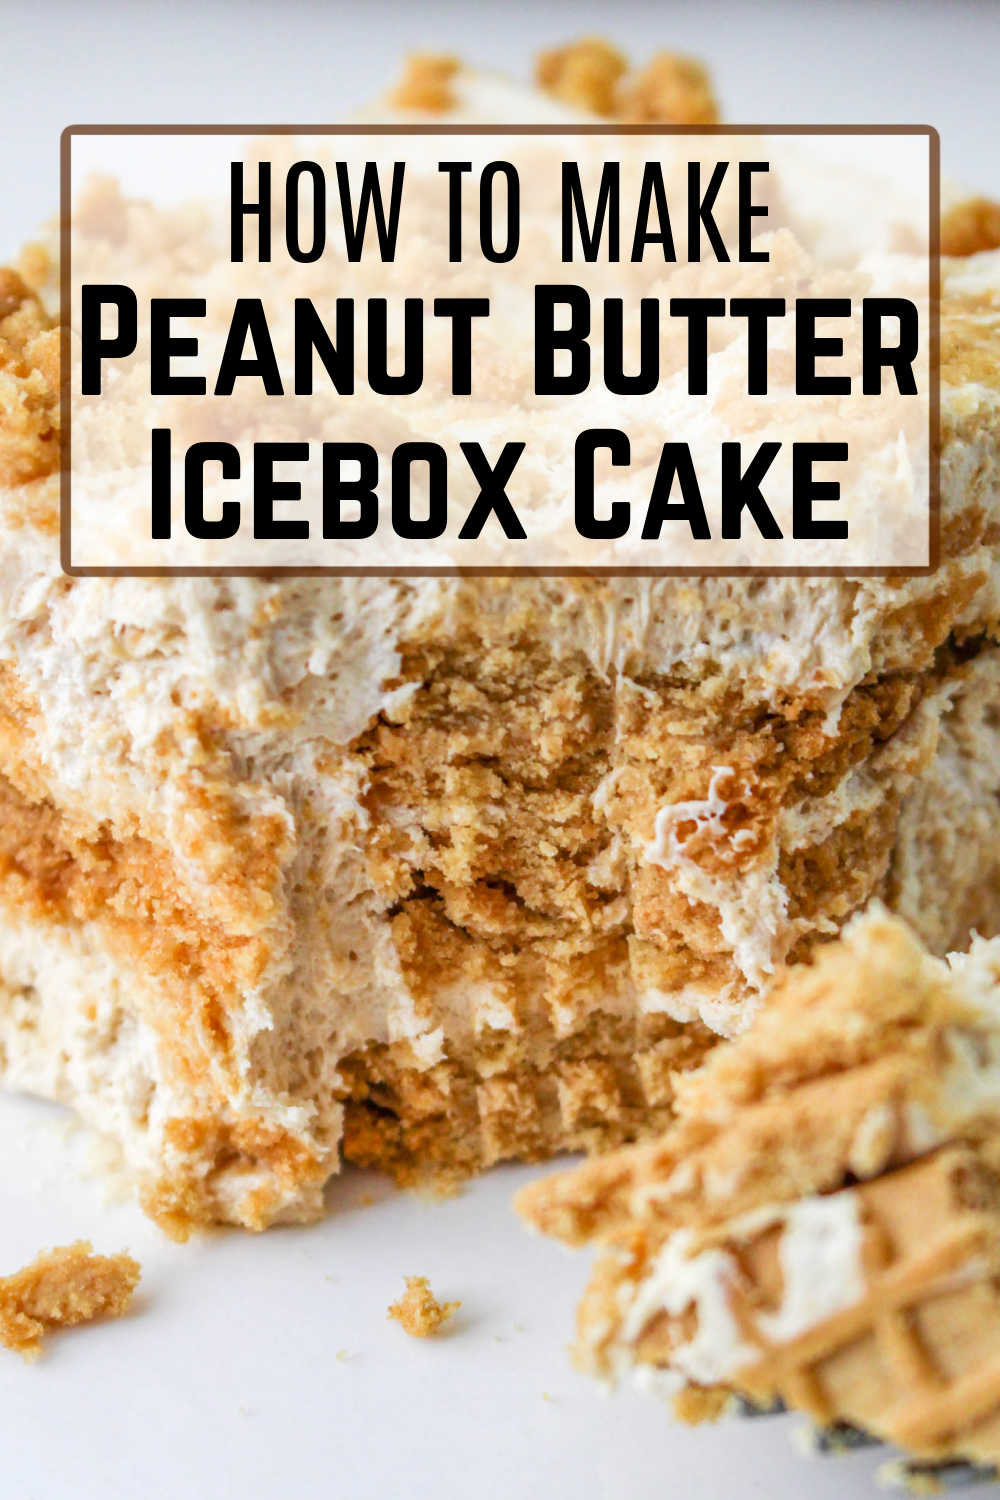 Pin image: piece of peanut butter ice box cake with a bite taken out and the bite on the fork in front and the words "How to make peanut butter ice box cake" on the image.